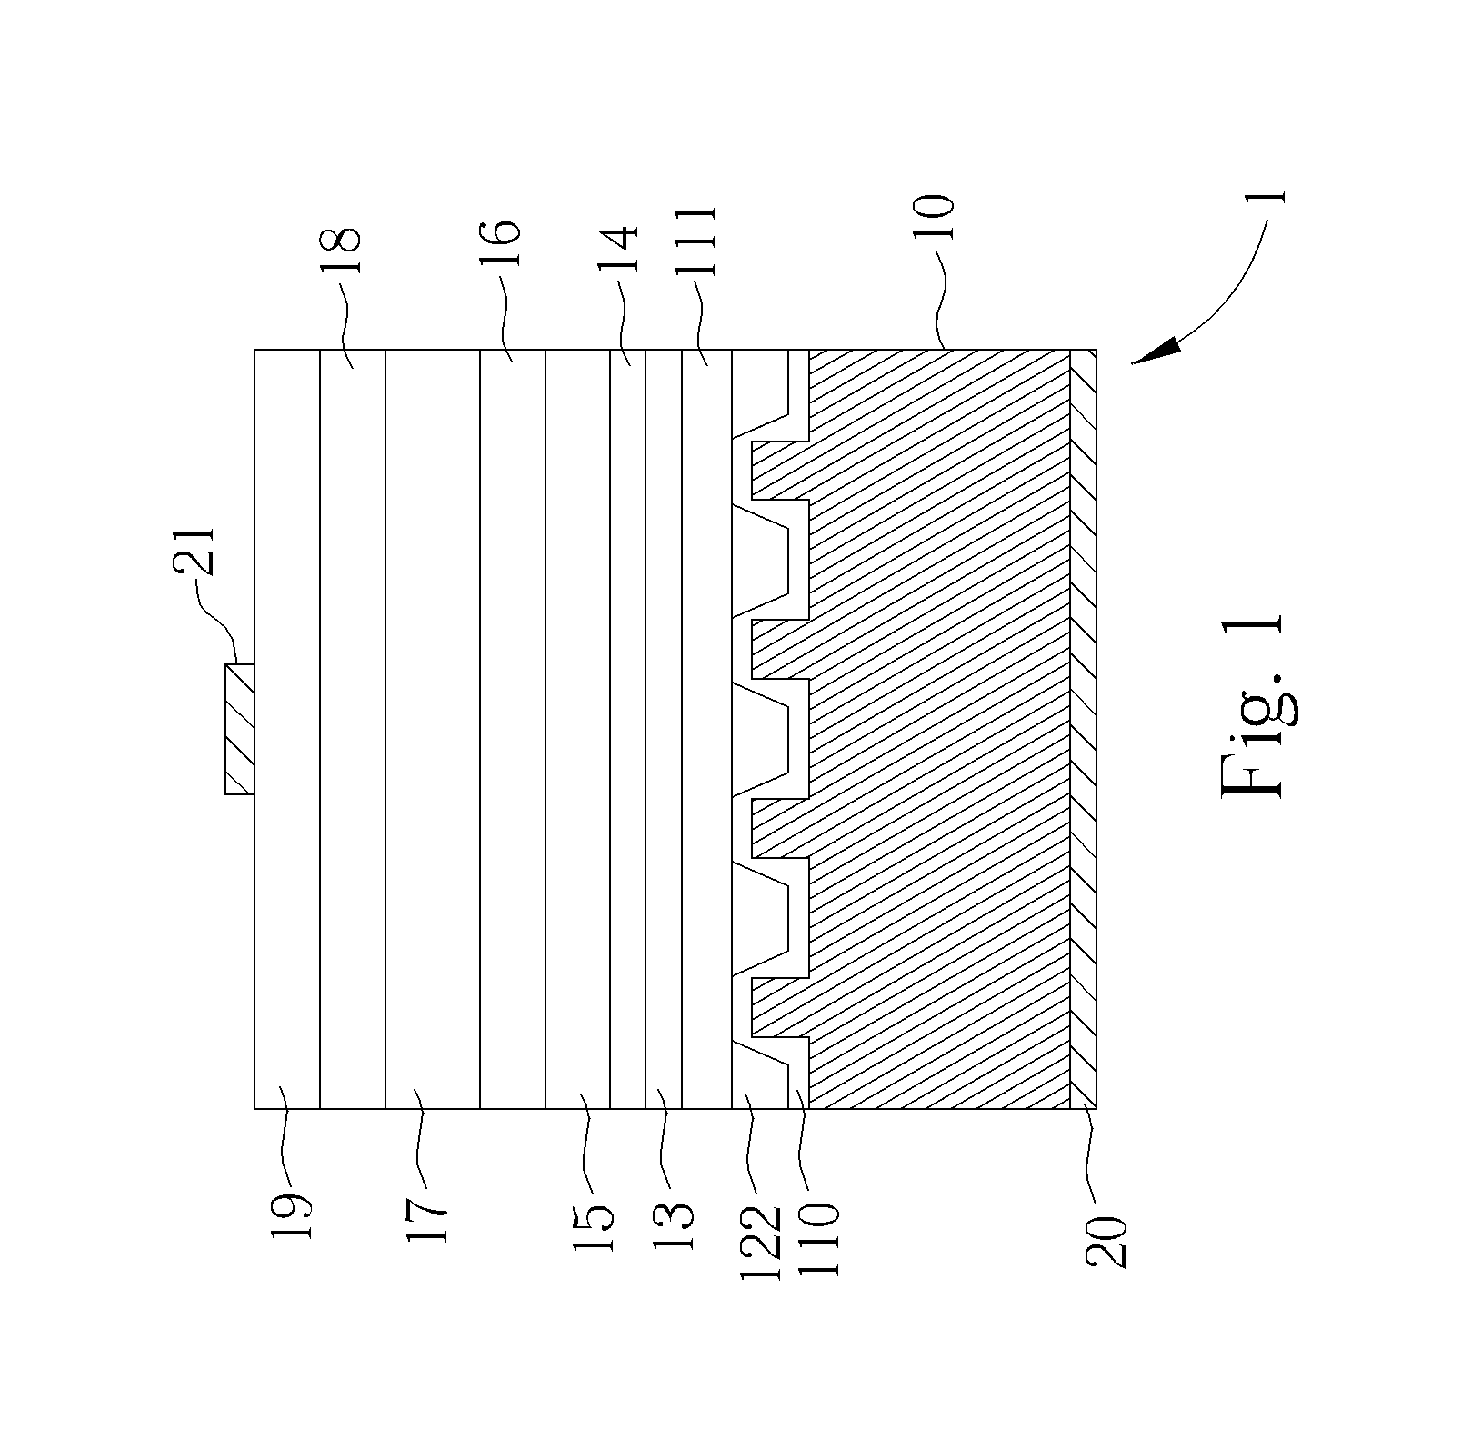 Organic adhesive light-emitting device with a vertical structure